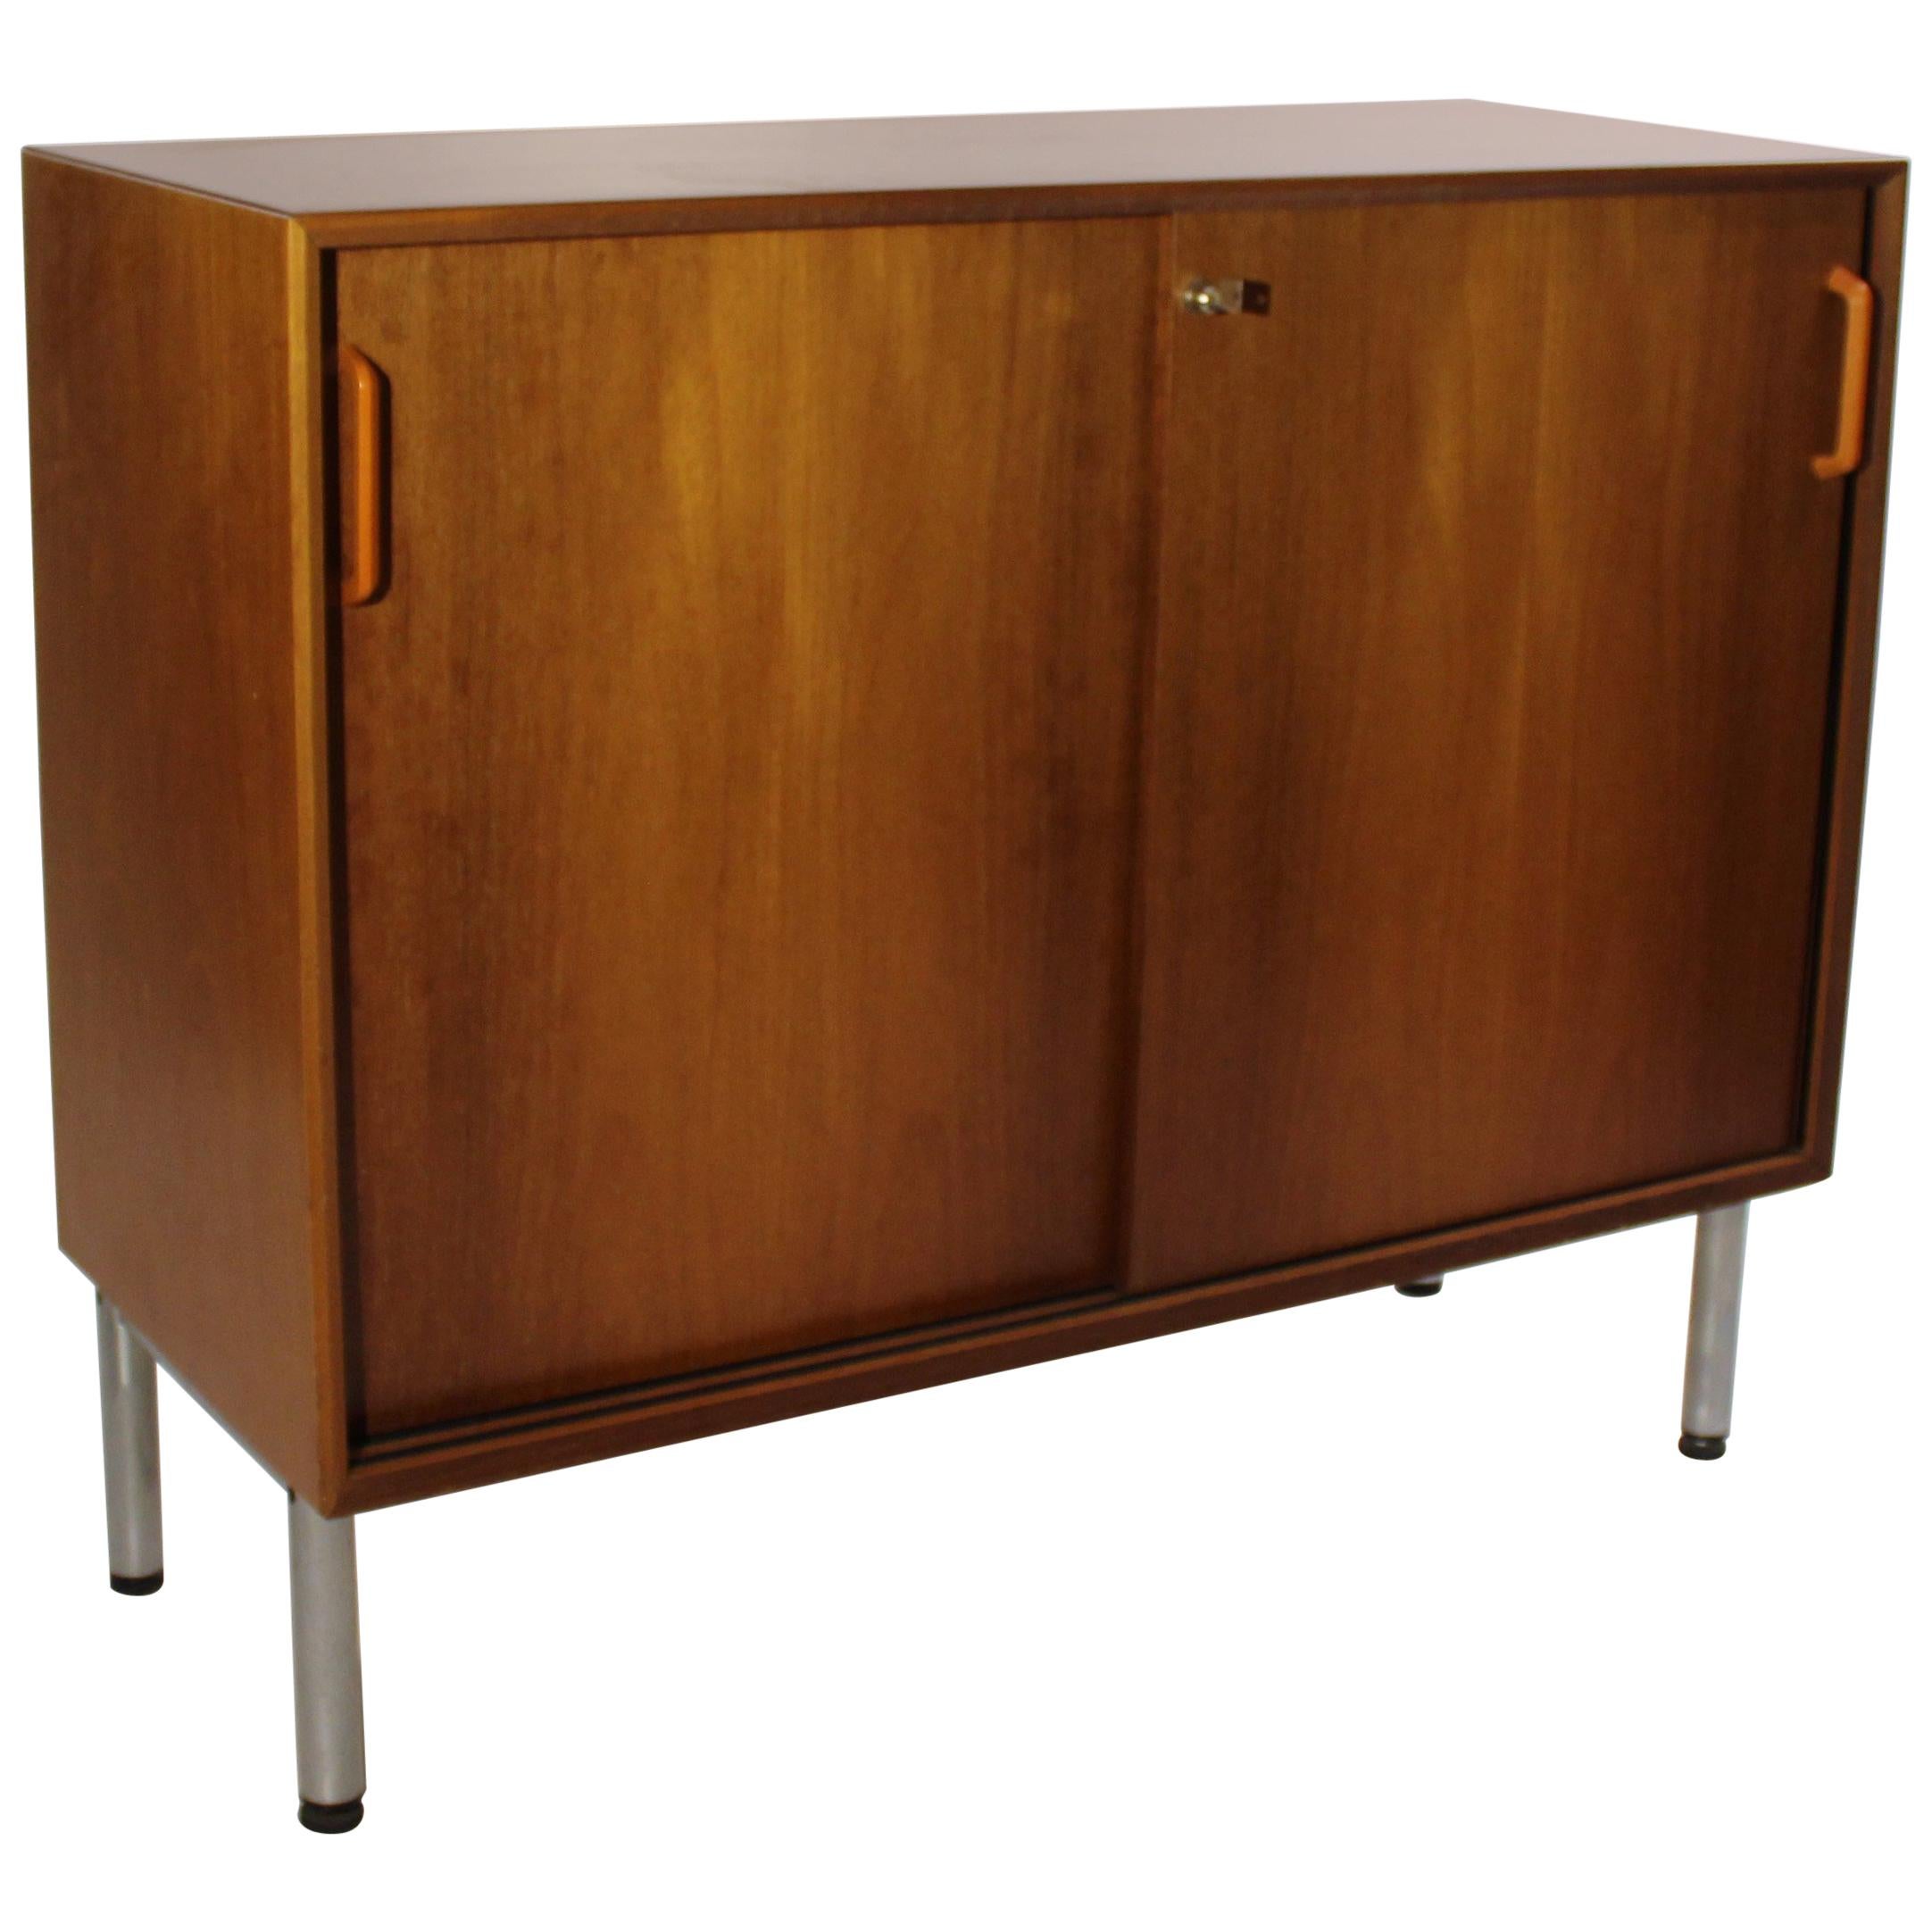 Cabinet with Sliding Doors in Light Mahogany of Danish Design from the 1960s